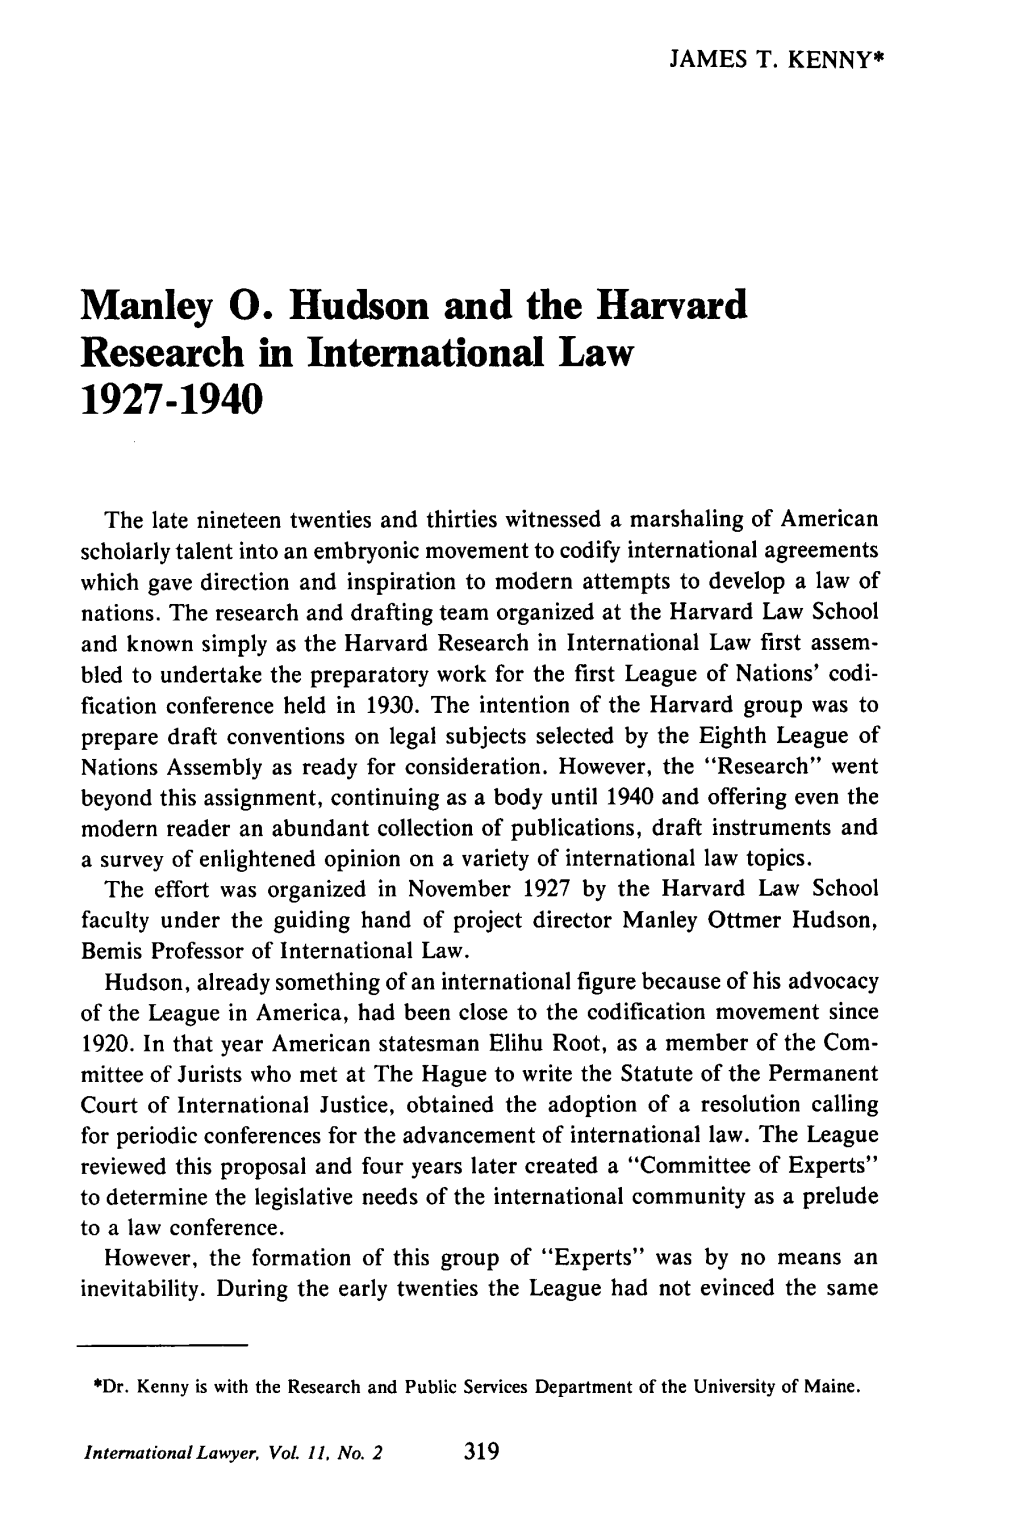 Manley O. Hudson and the Harvard Research In